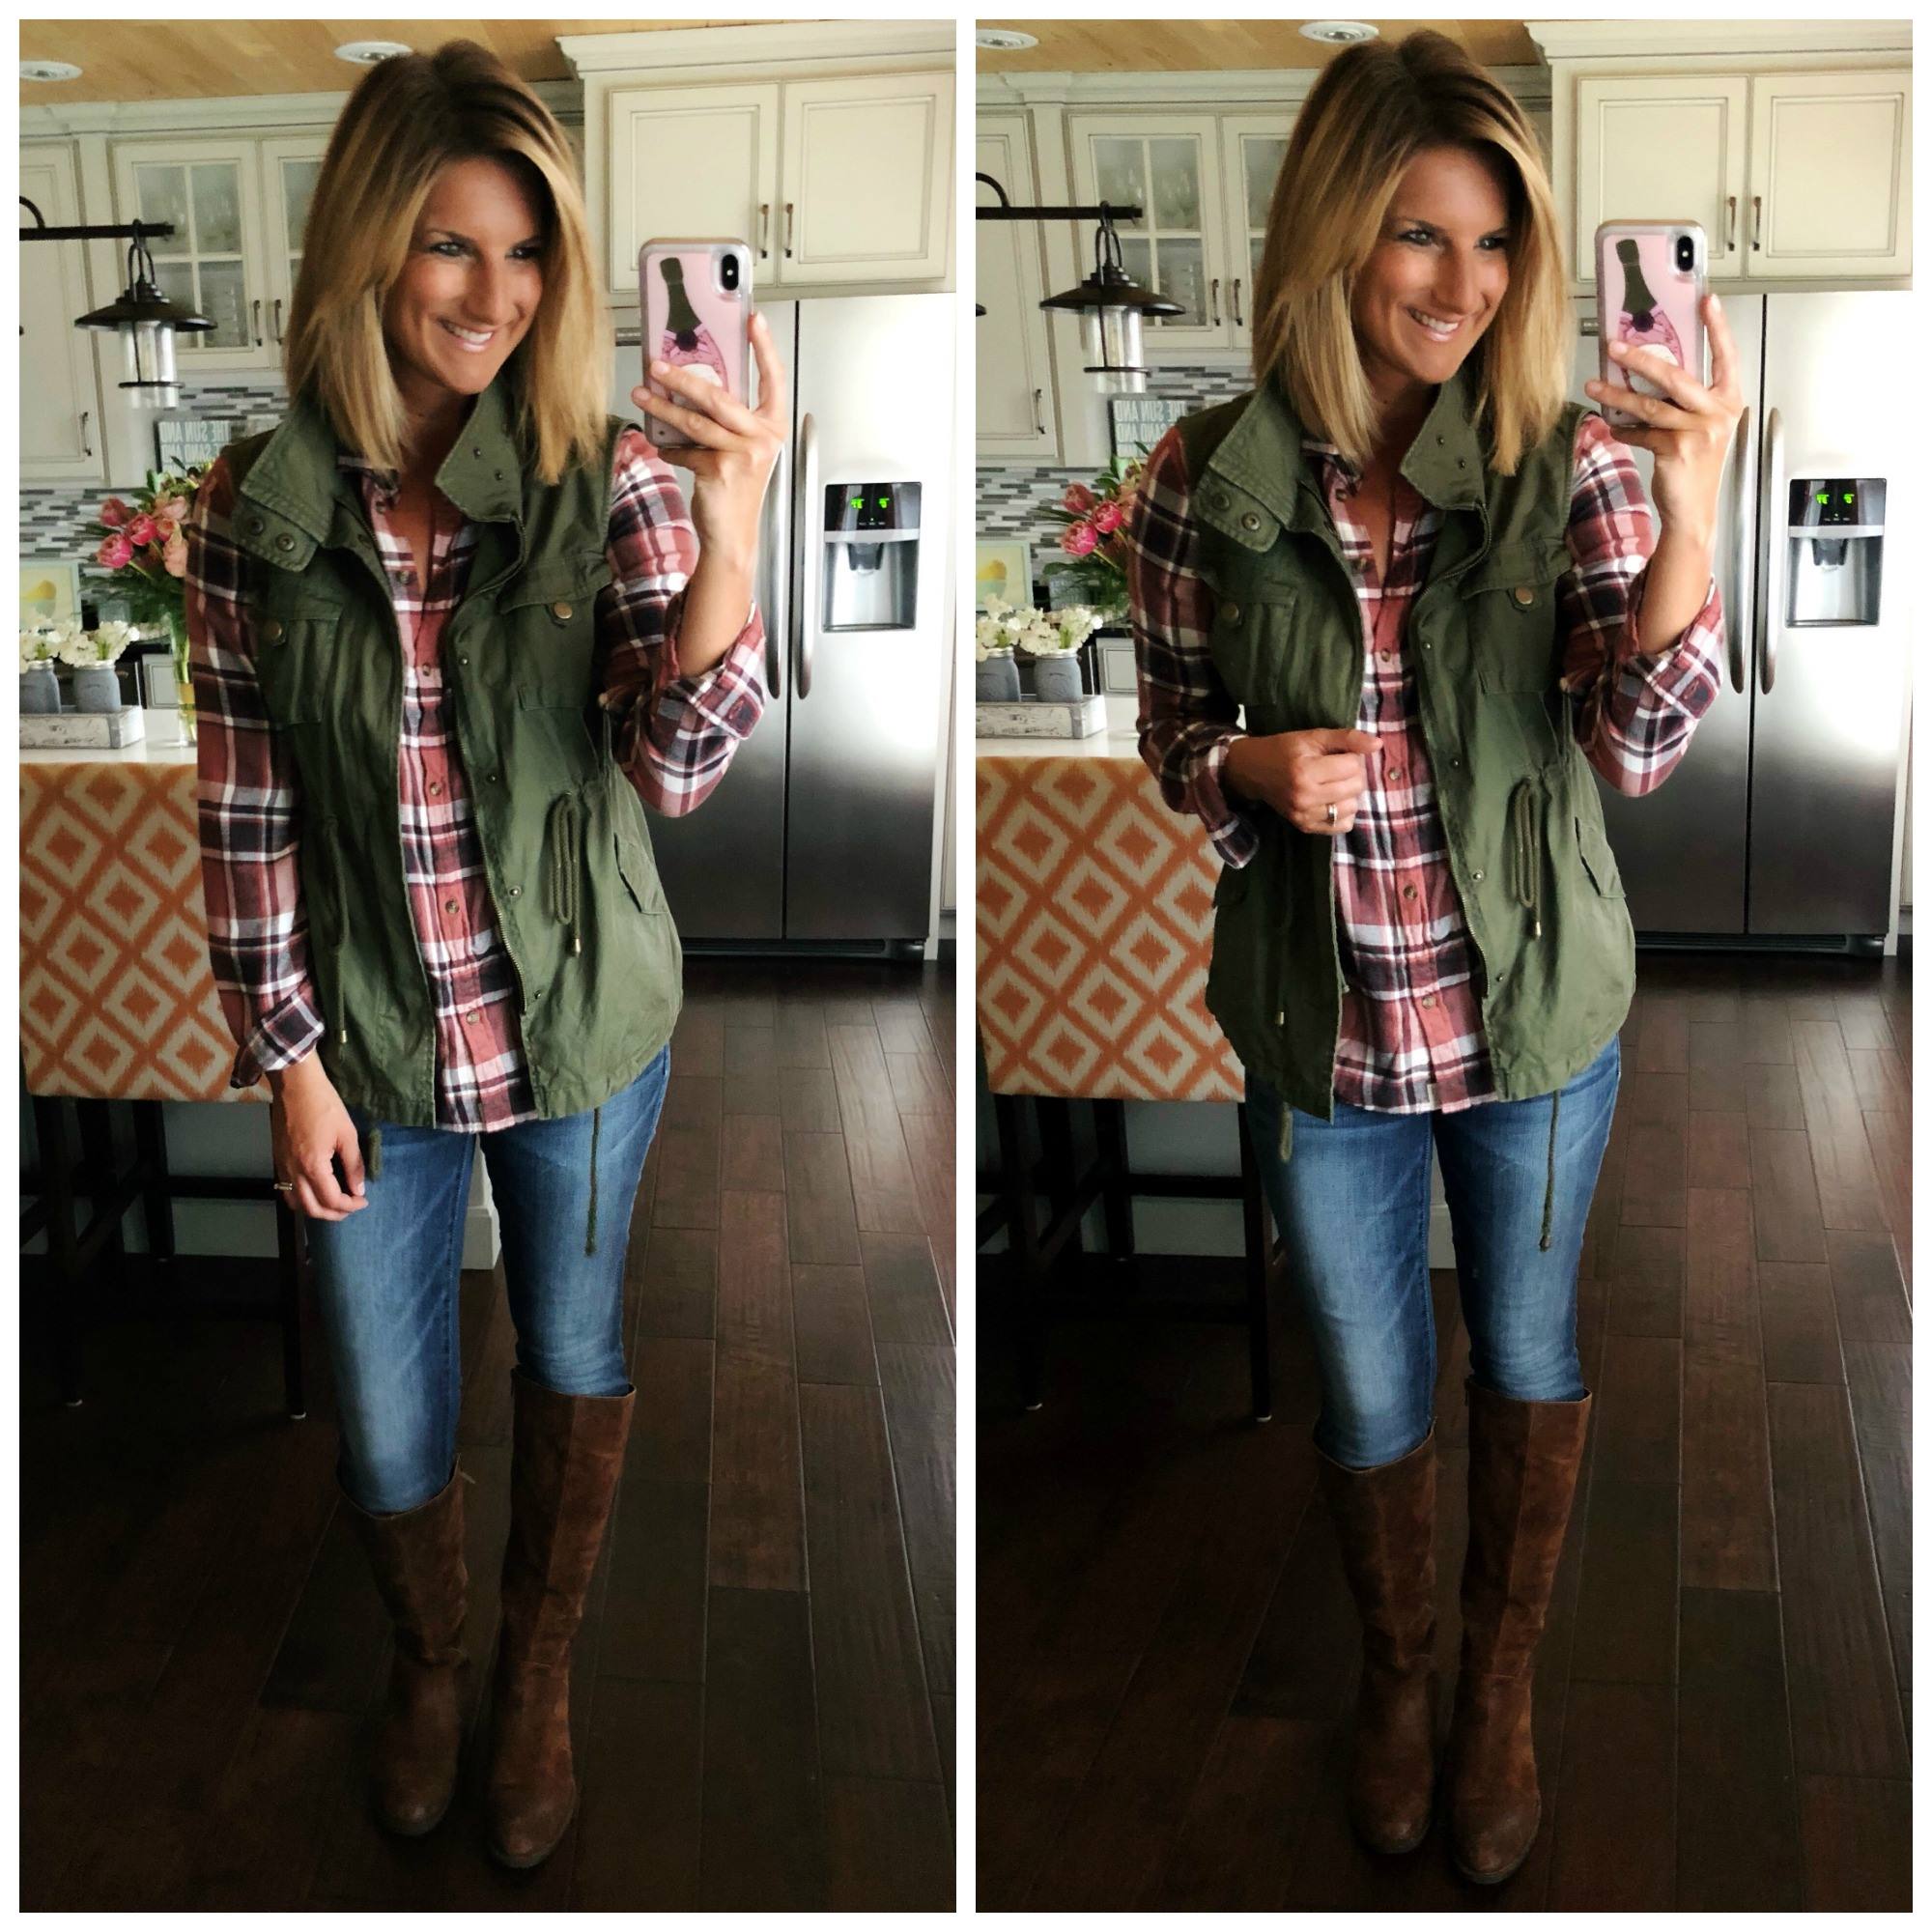 How to wear a vest in the Spring // Plaid Top + Military Vest // Spring Fashion